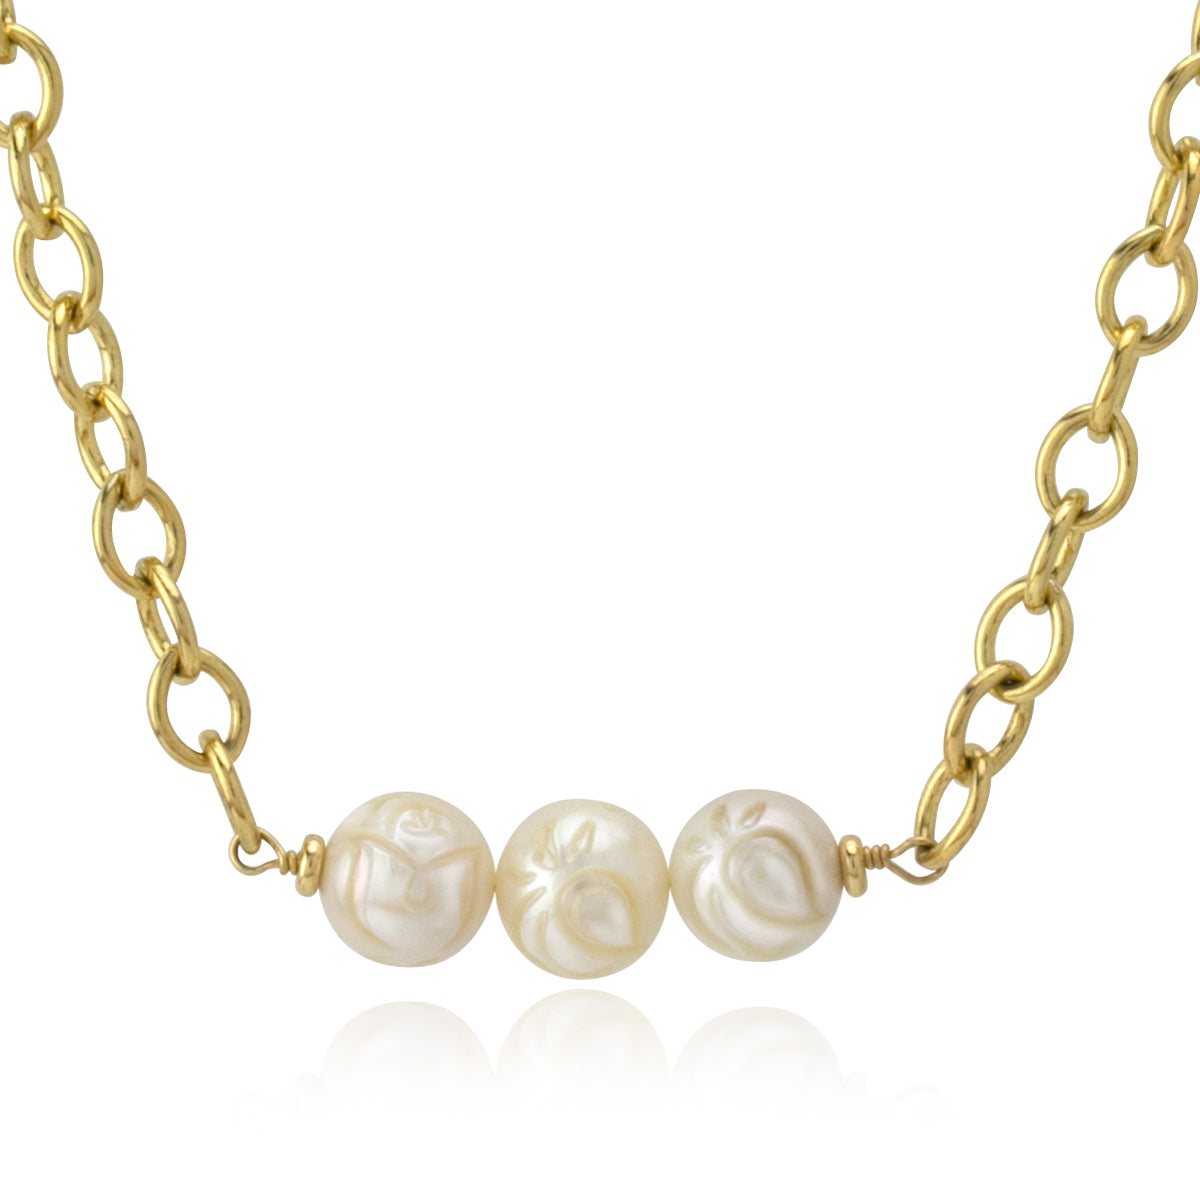 10mm Hand Carved Pearl Necklace